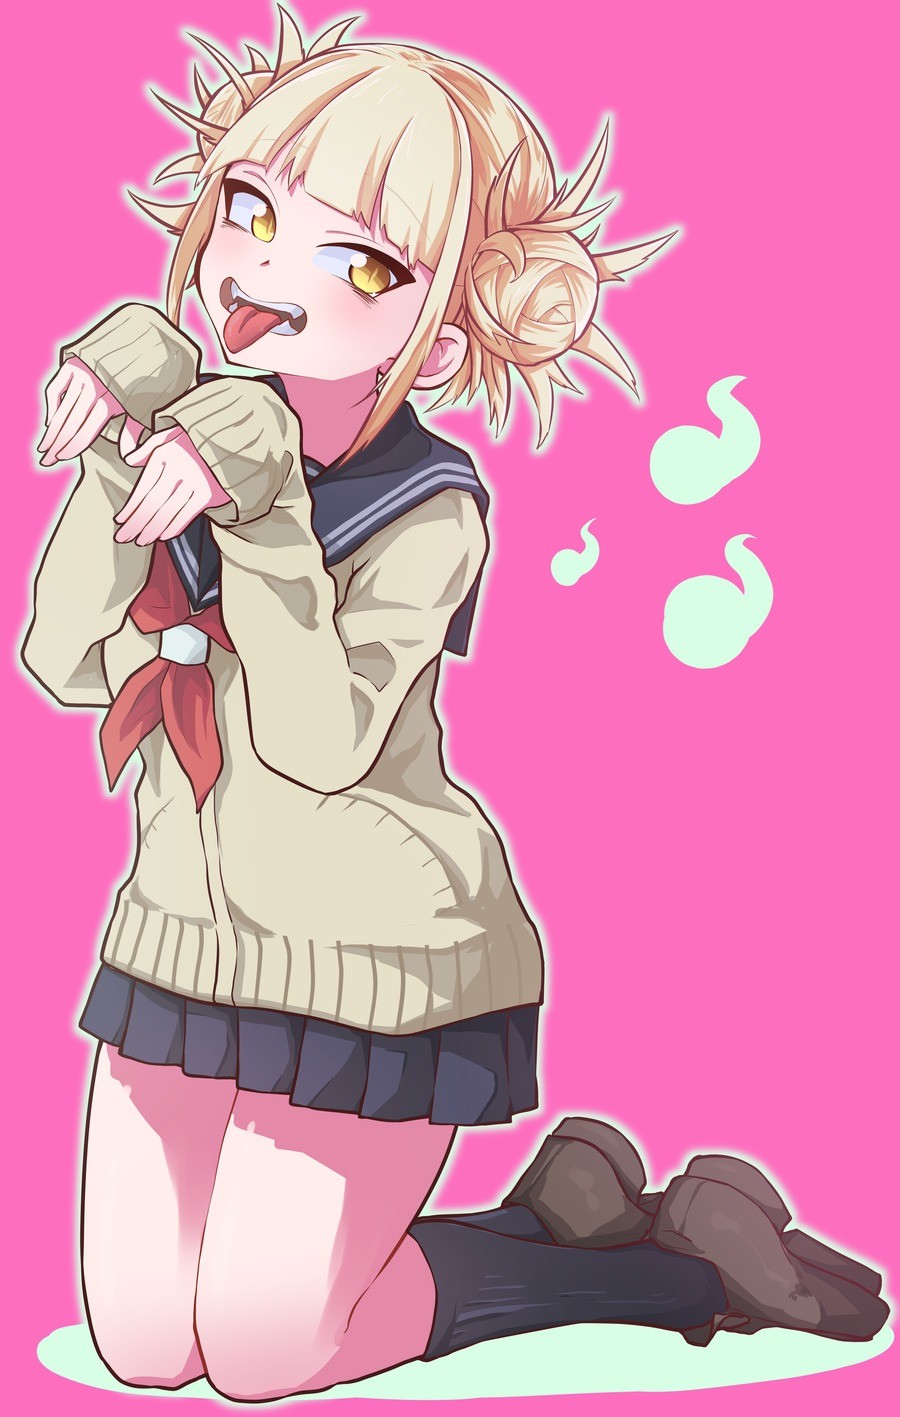 Daily Toga - 616: Doggy style. join list: DailyToga (476 subs)Mention History Source: .. Why is there sperm haunting her?